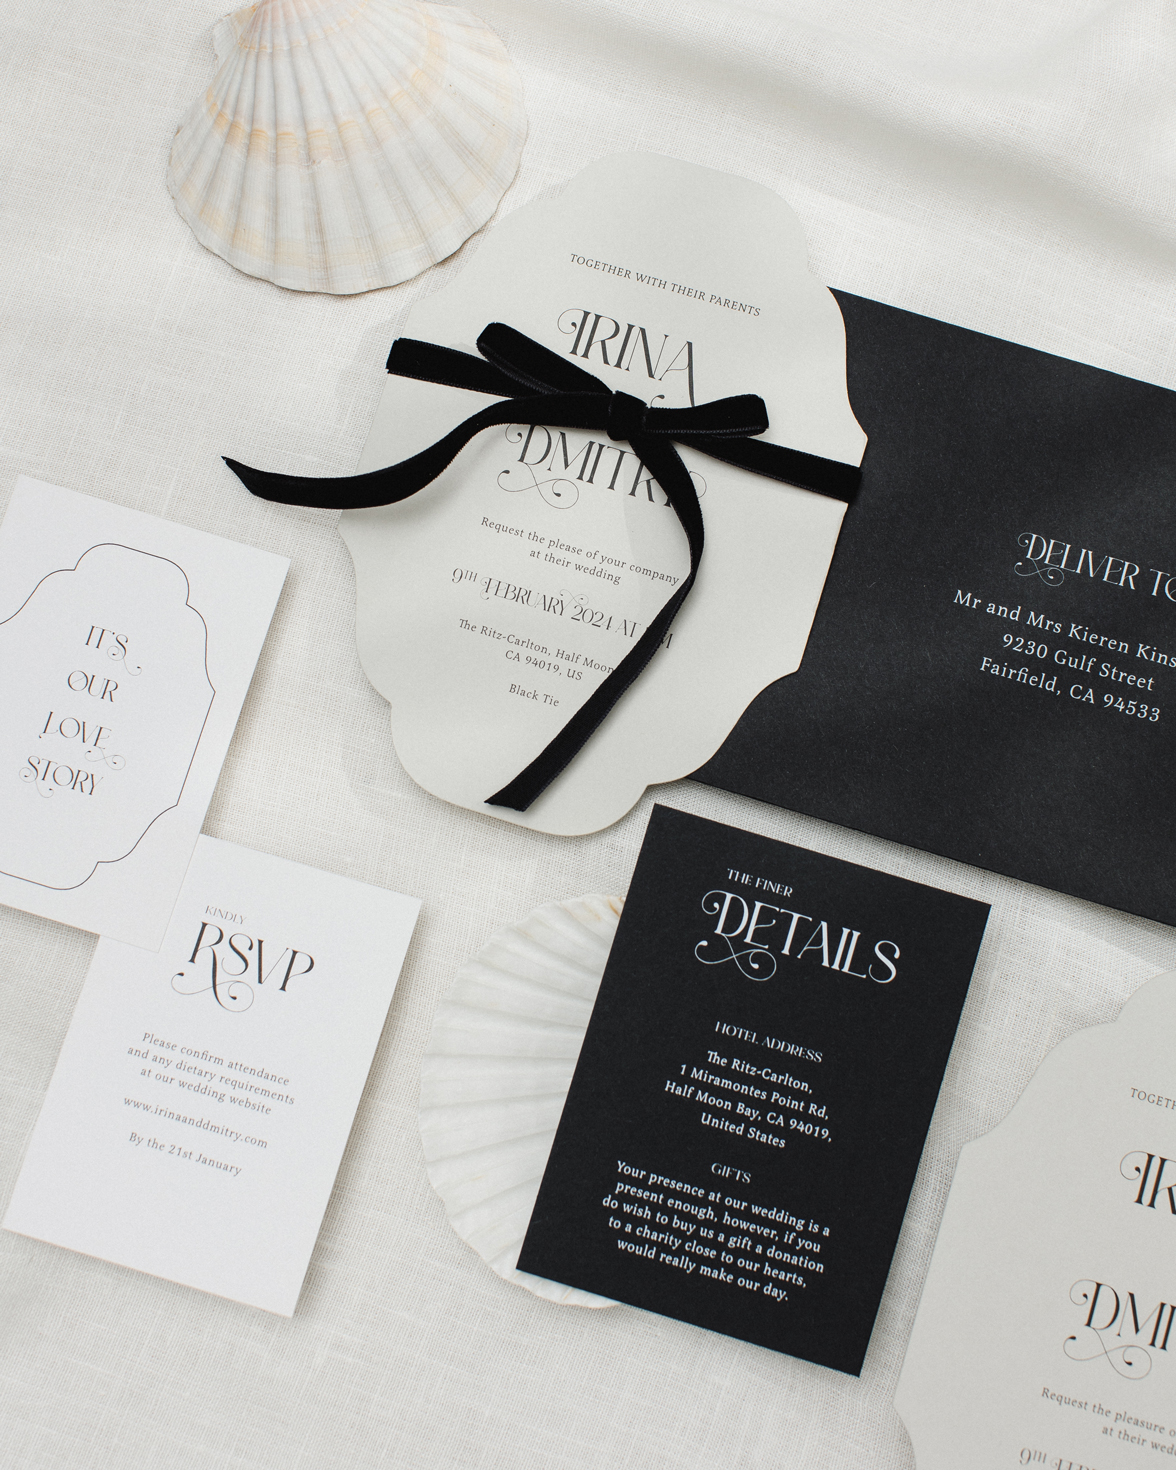 Vintage inspired cut to shape wedding invitation with ornate font and black velvet bow. White RSVP card with vintage border.Black and white wedding details card